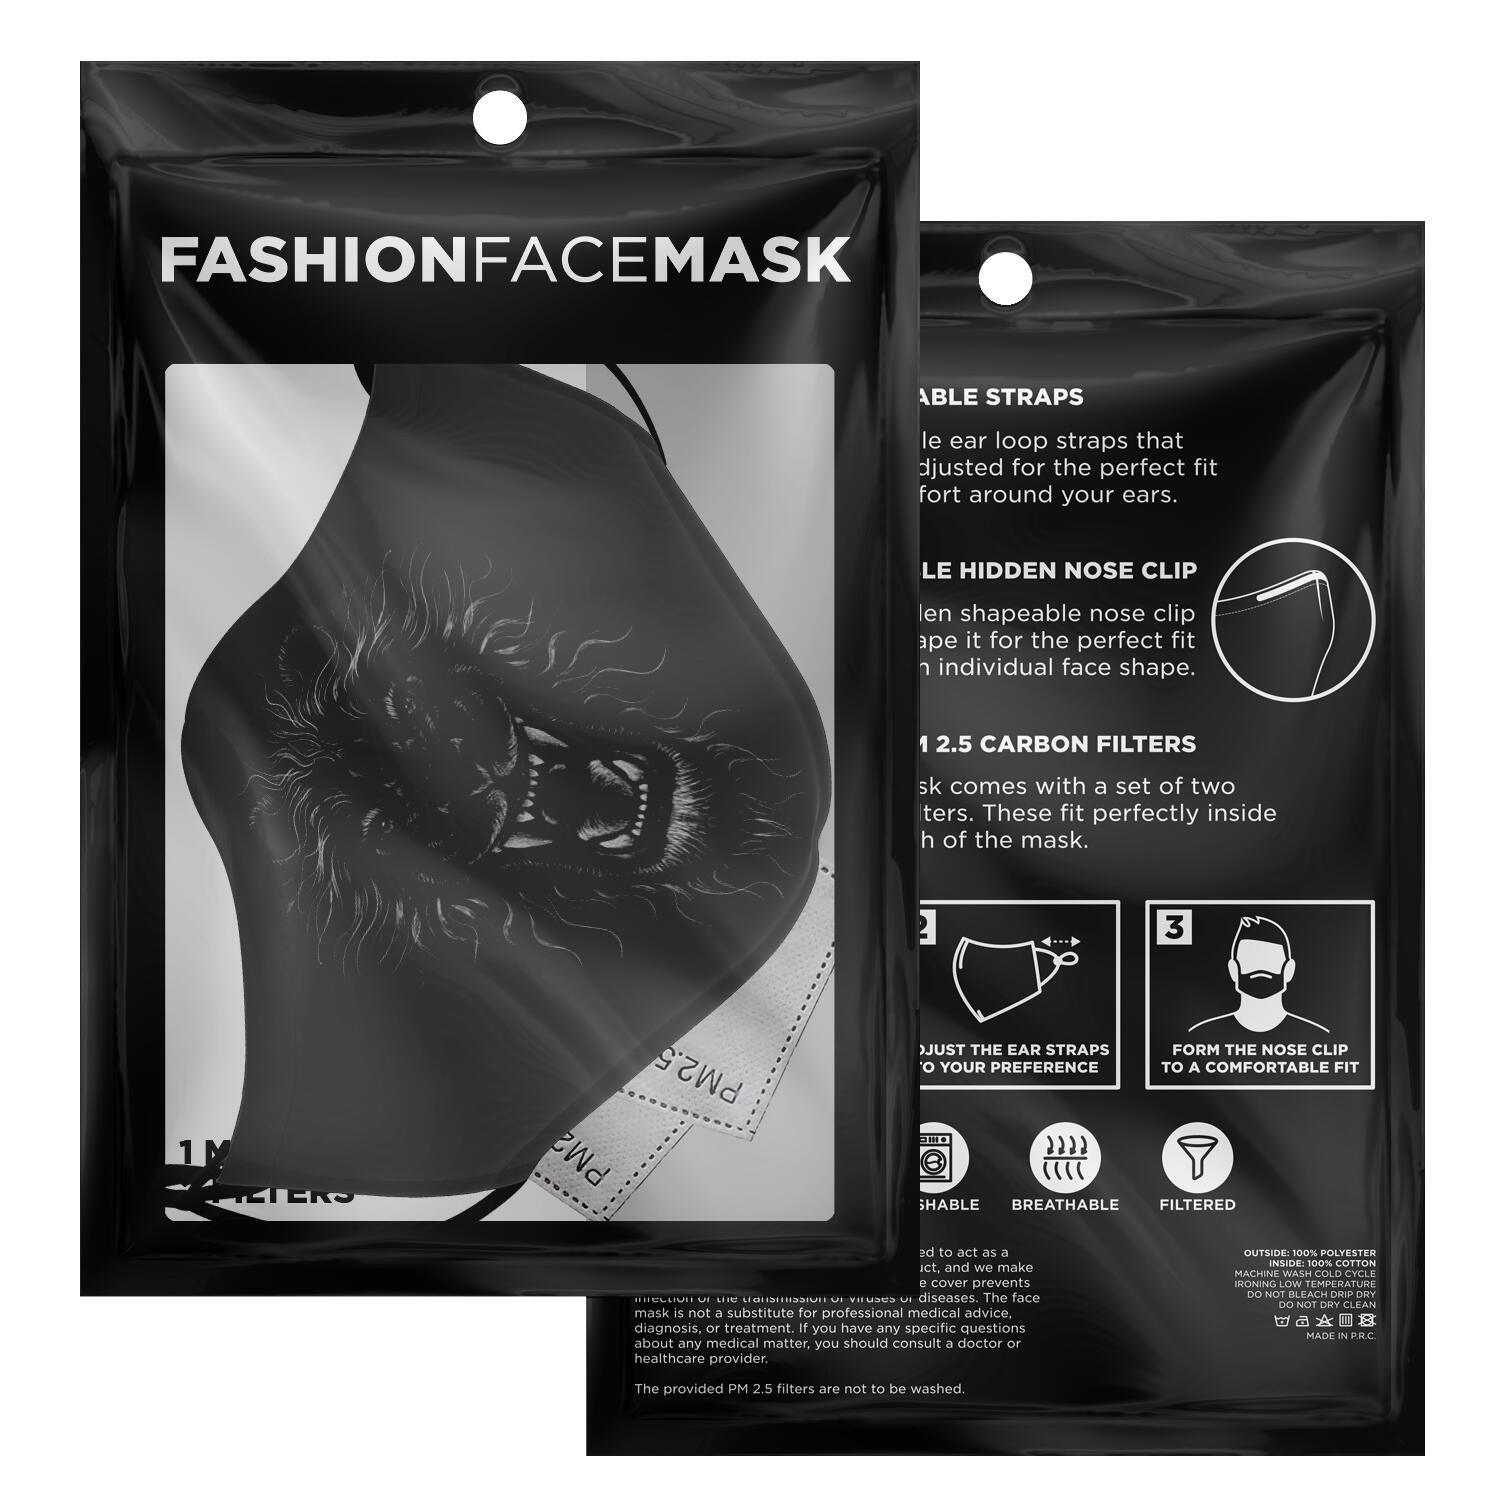 Black Lion Head Face Mask With Filter, Wild Fabric Dust Cloth Mouth Cover Fashion Washable Reusable Adult Men Women Kids Rave Mask Starcove Fashion